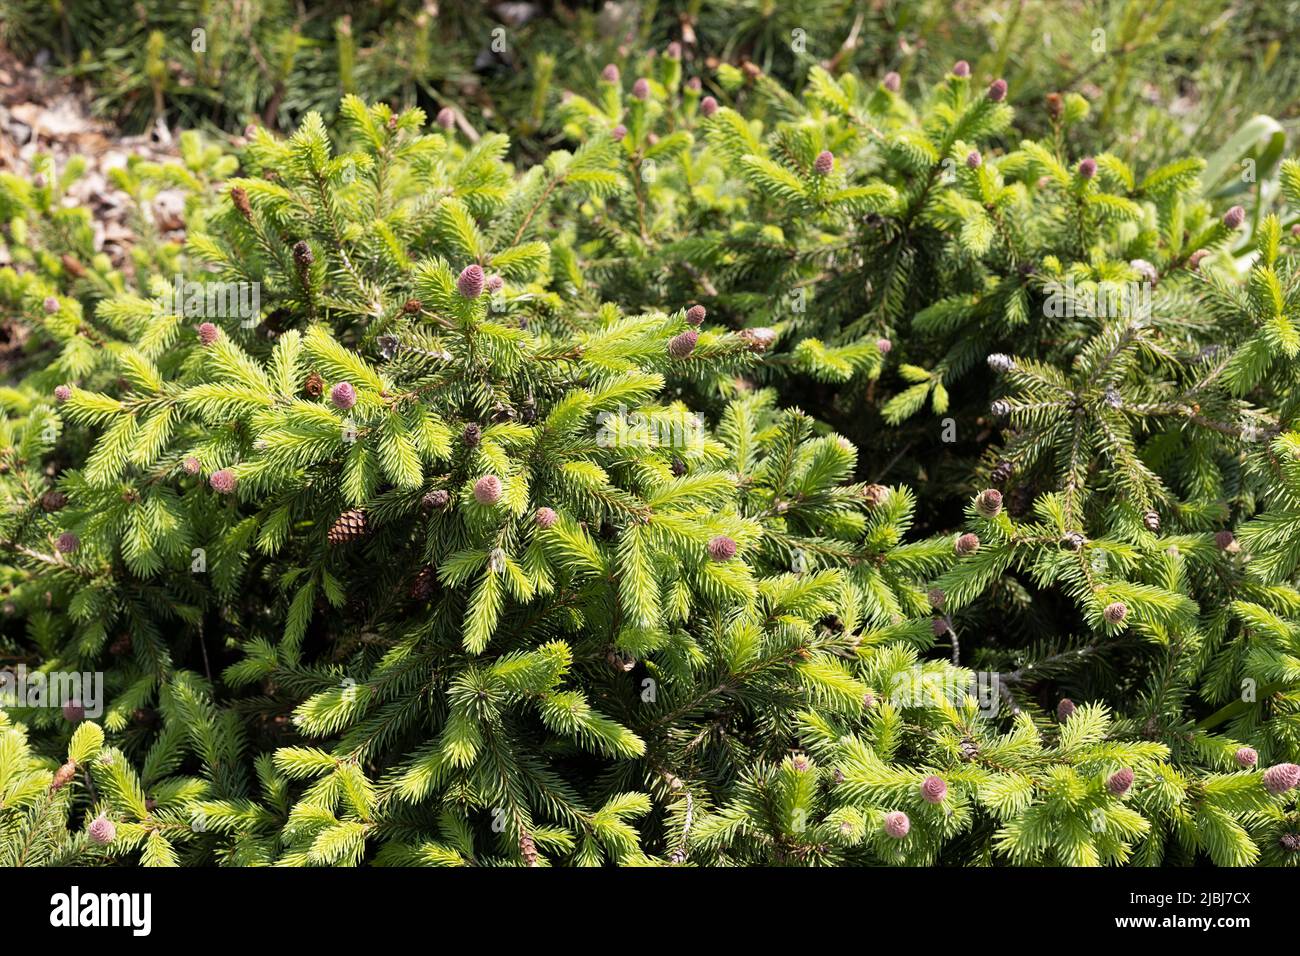 Picea abies 'Pusch' Norway spruce. Stock Photo